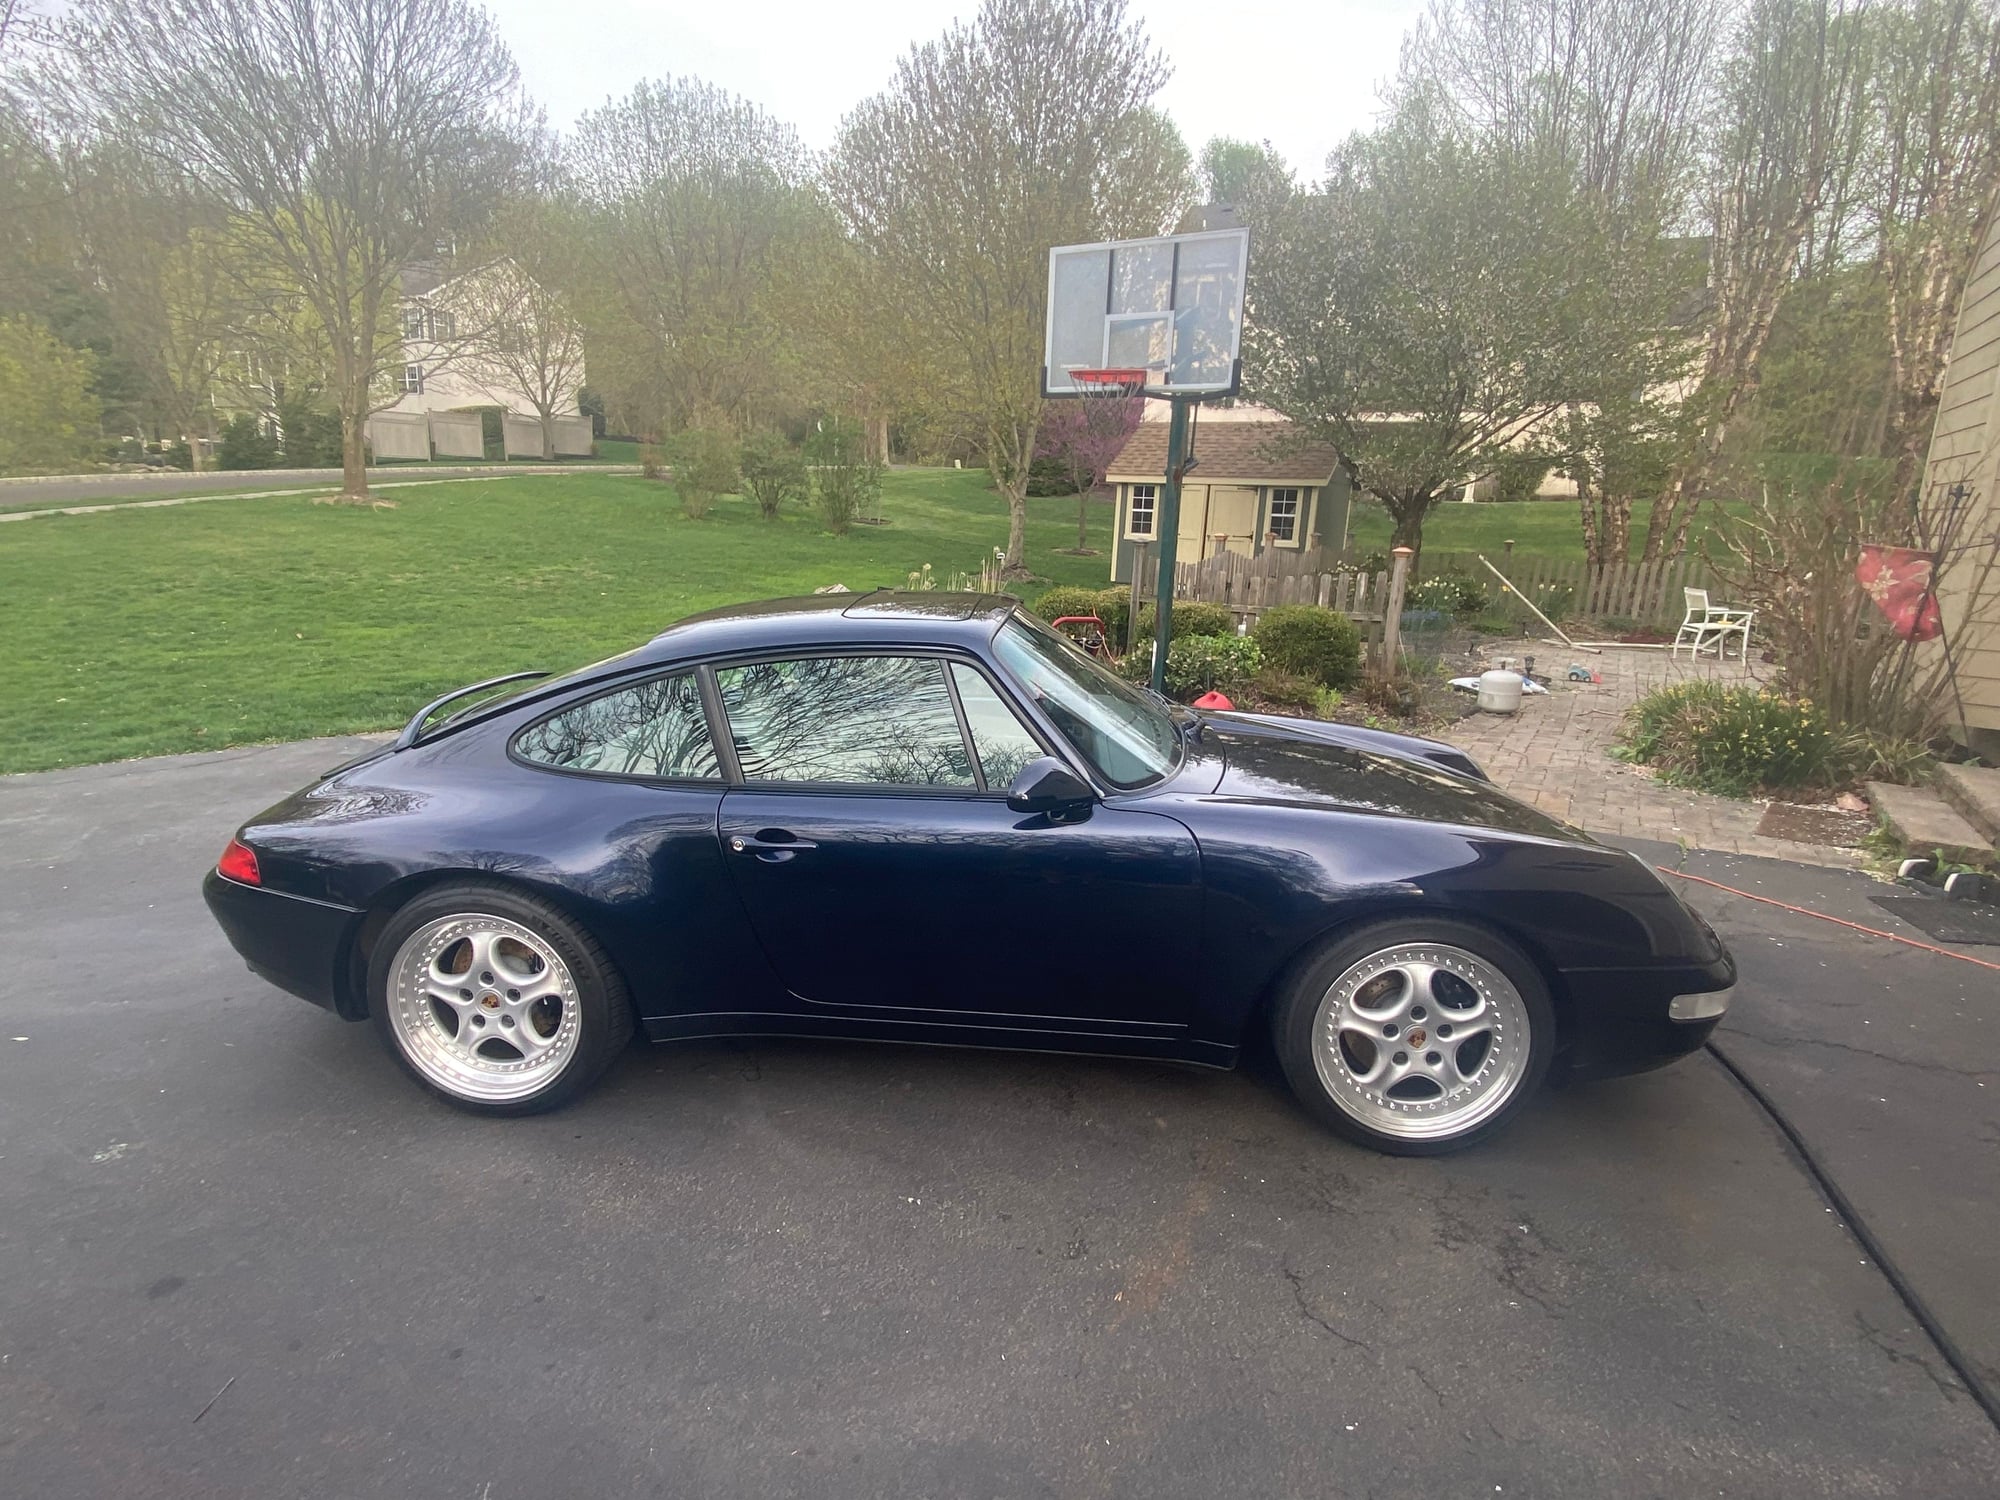 1995 Porsche 911 -  - Used - VIN Wpoaa2994ss322646 - 42,000 Miles - 6 cyl - 2WD - Manual - Coupe - Blue - Doylestown, PA 18902, United States